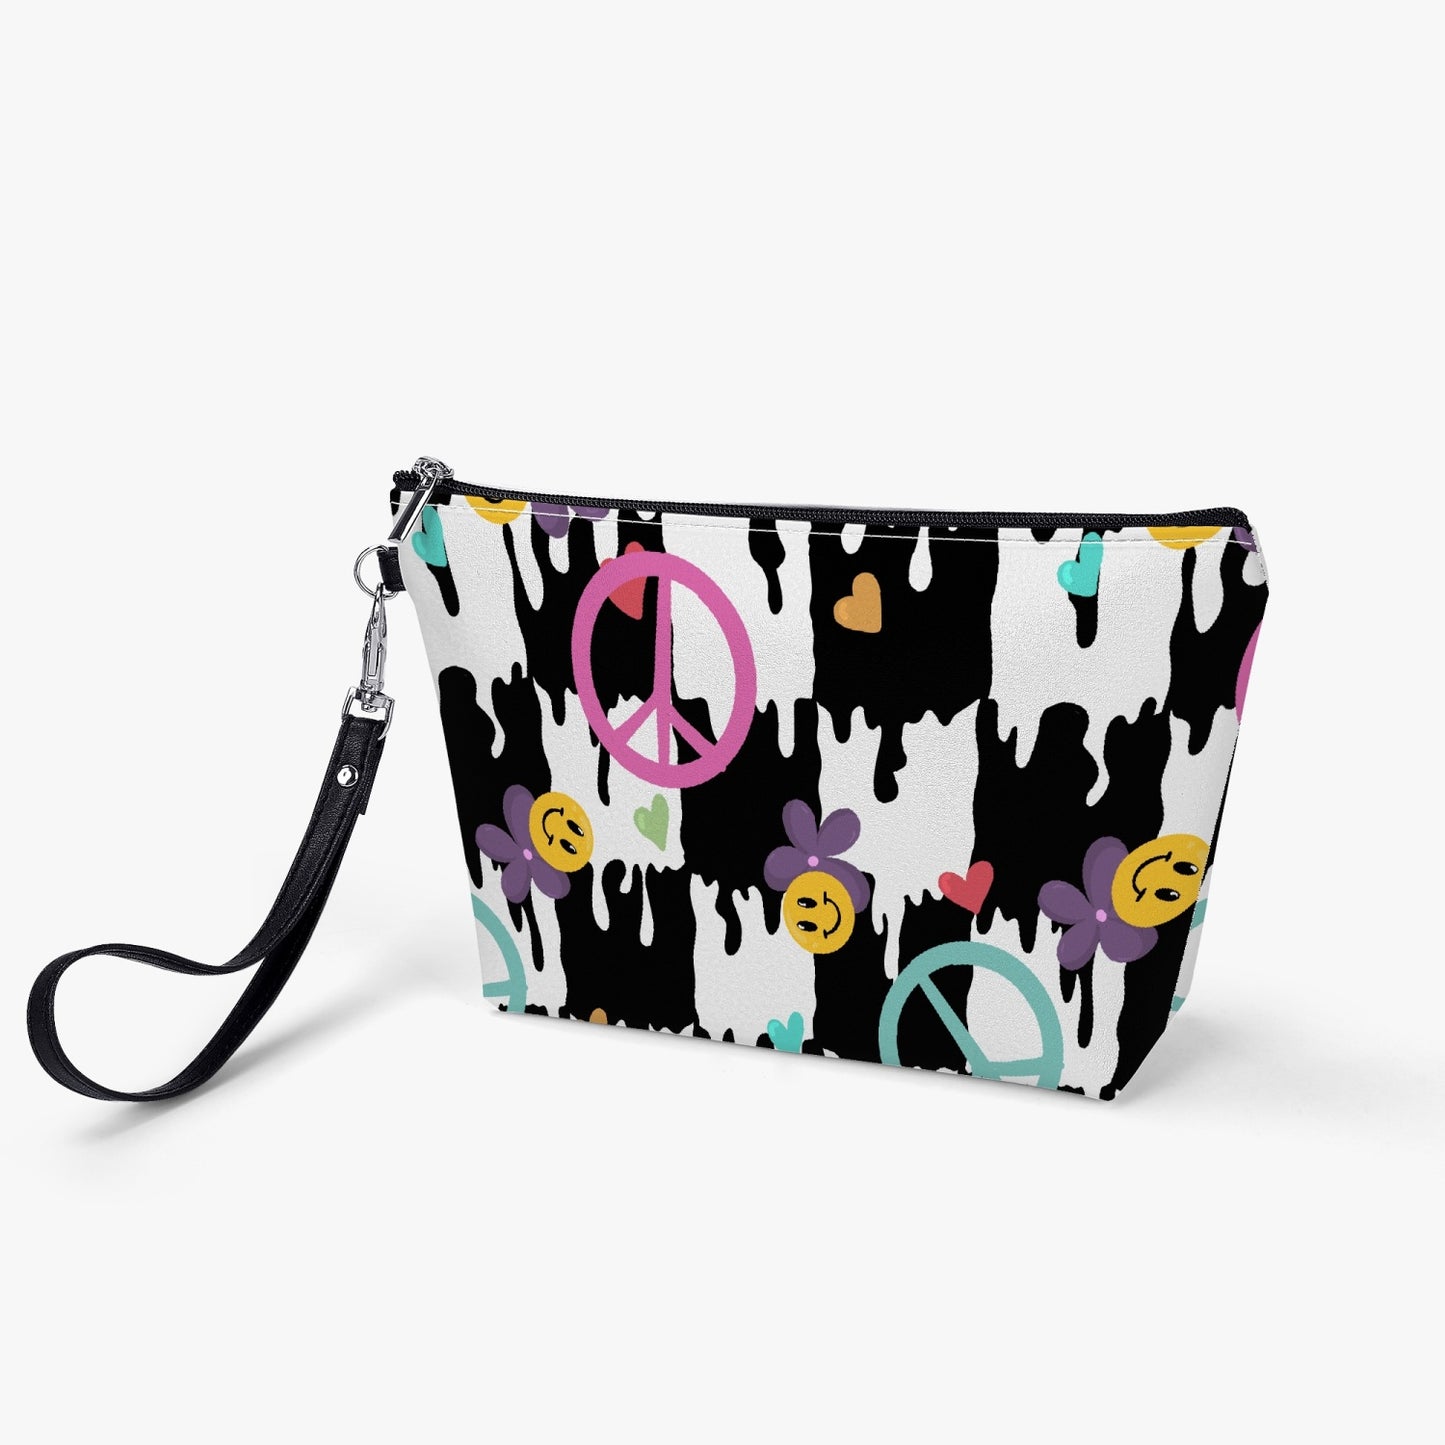 Psychedelic Smiley wristlet